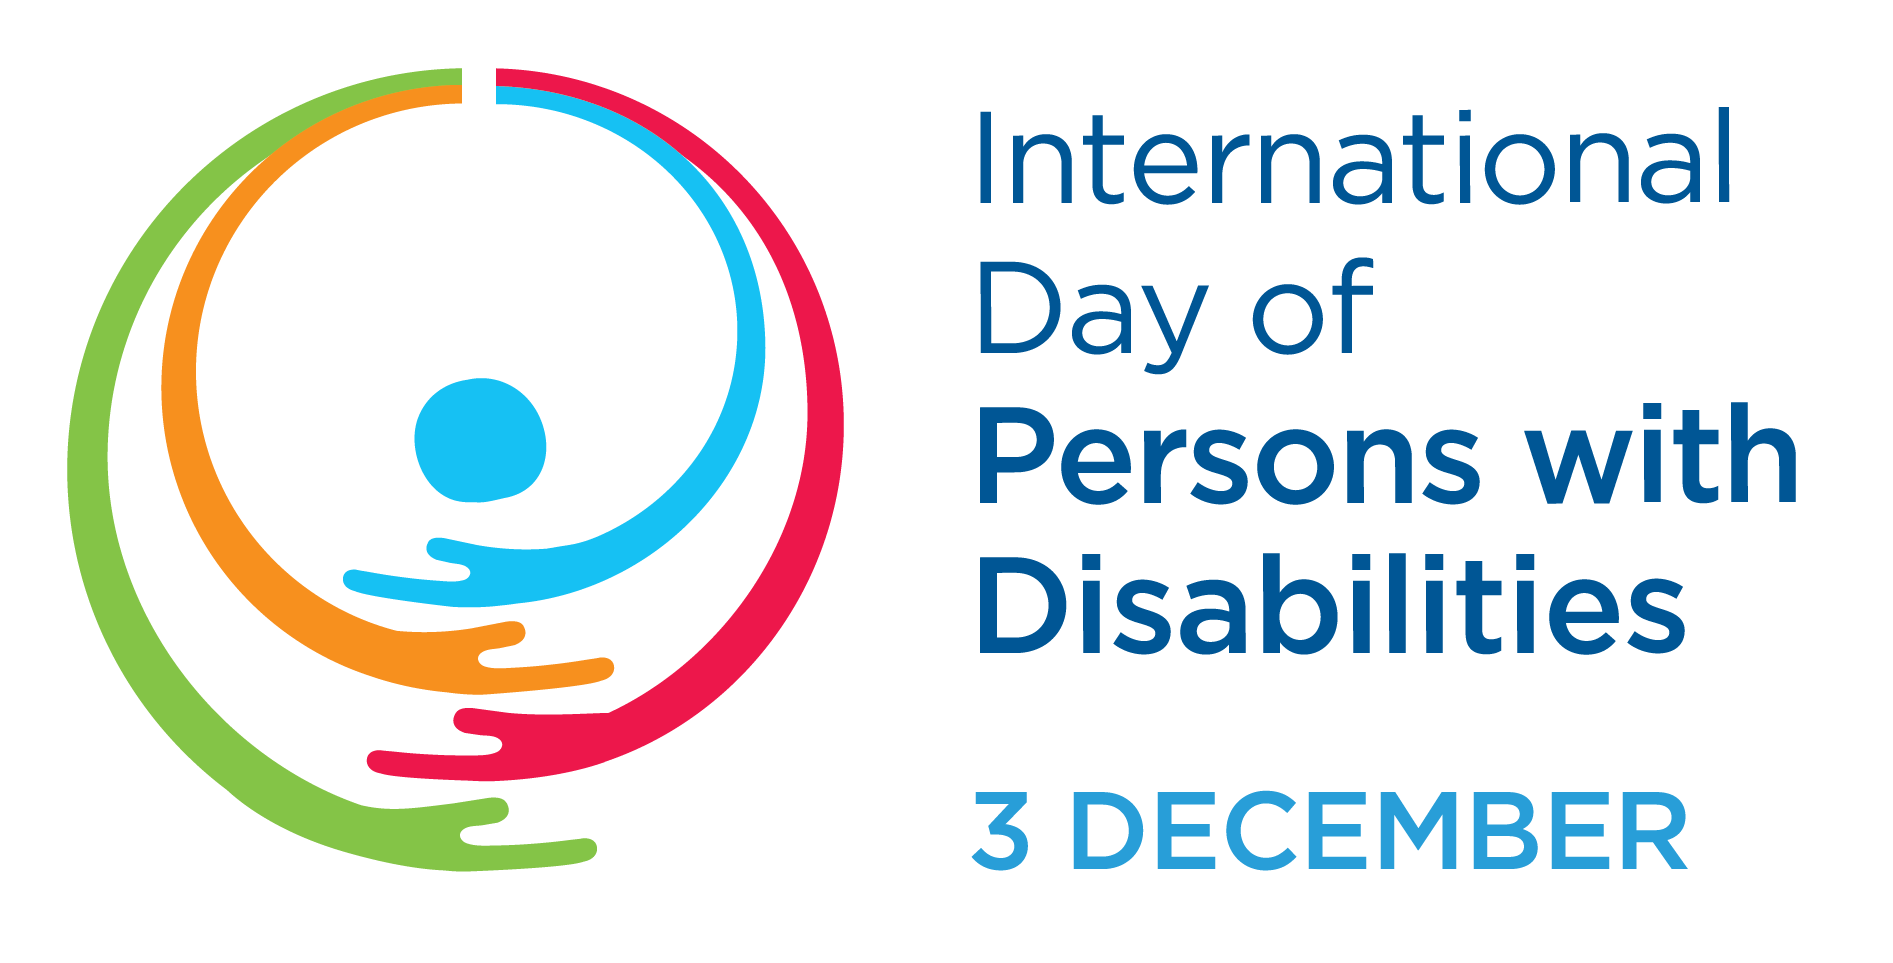  International Day for Persons with Disabilities 